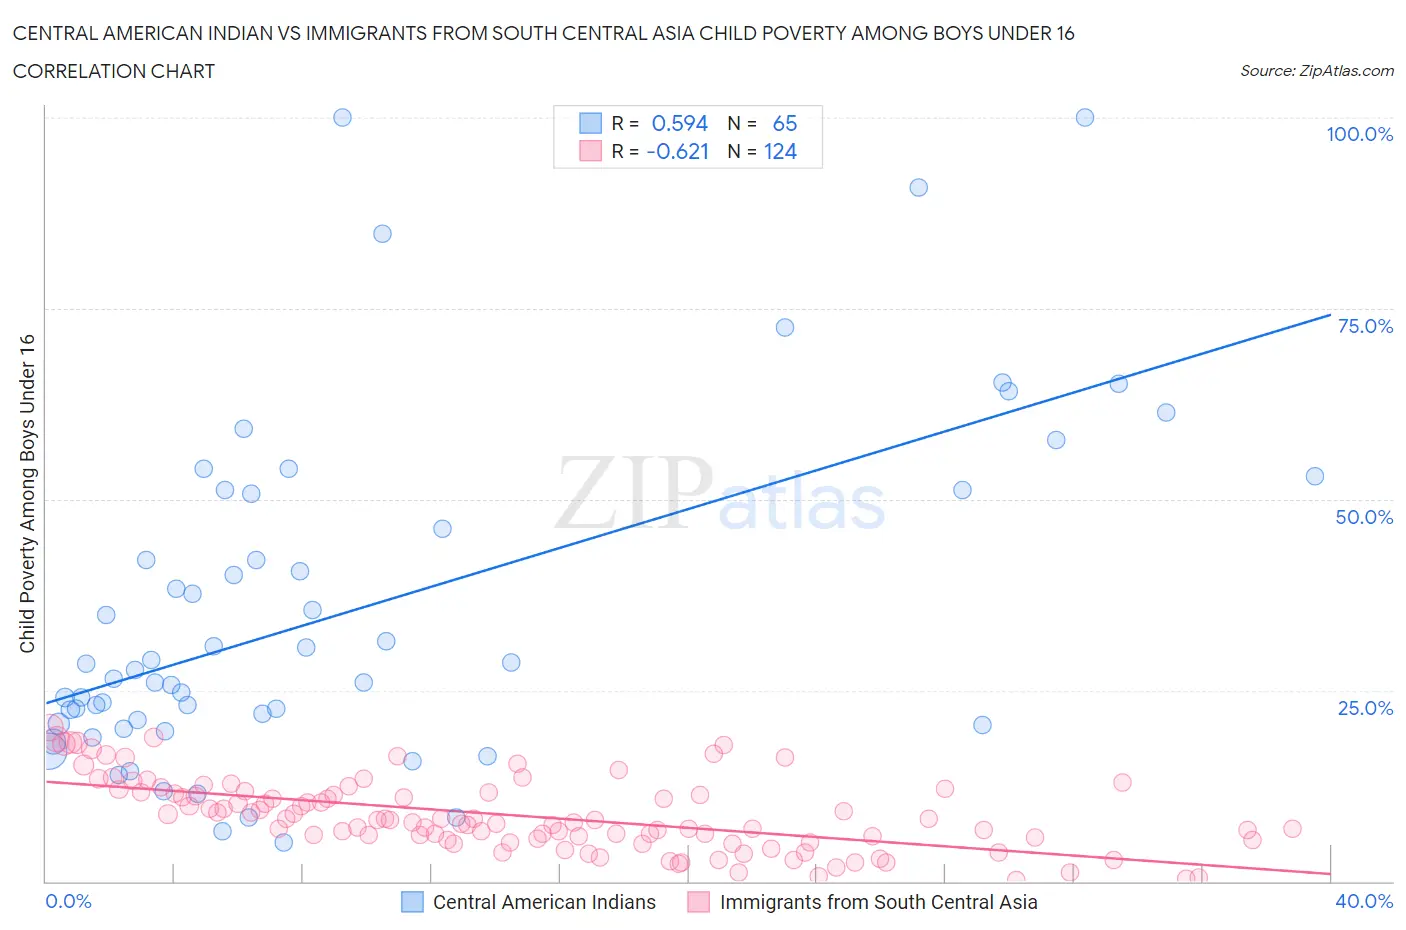 Central American Indian vs Immigrants from South Central Asia Child Poverty Among Boys Under 16